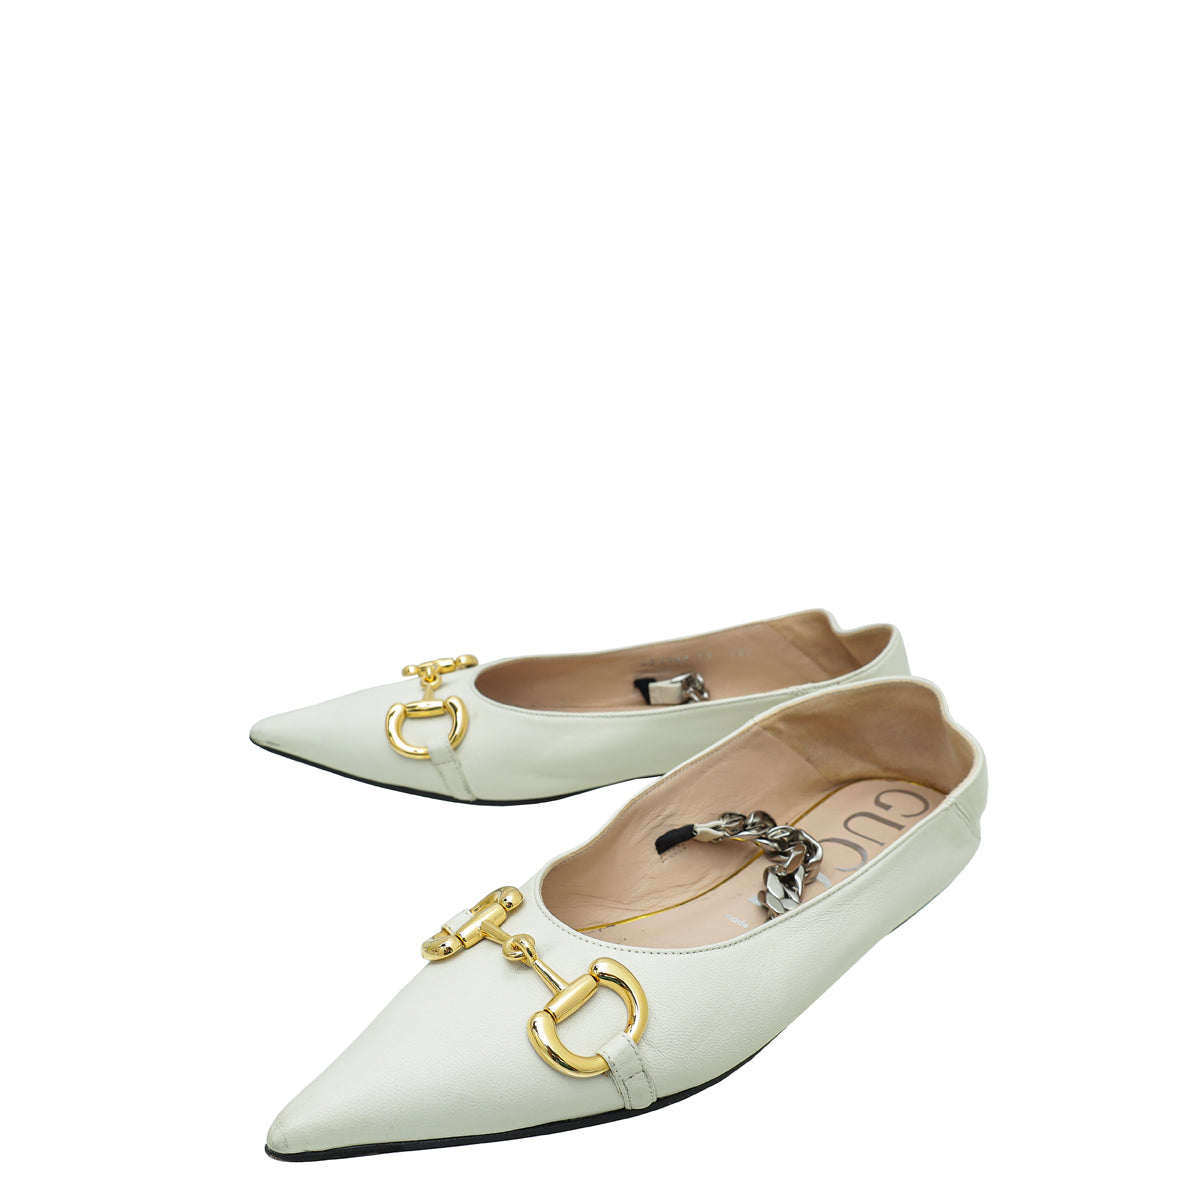 Gucci White Horsebit and Chain Accent Leather Flats 39